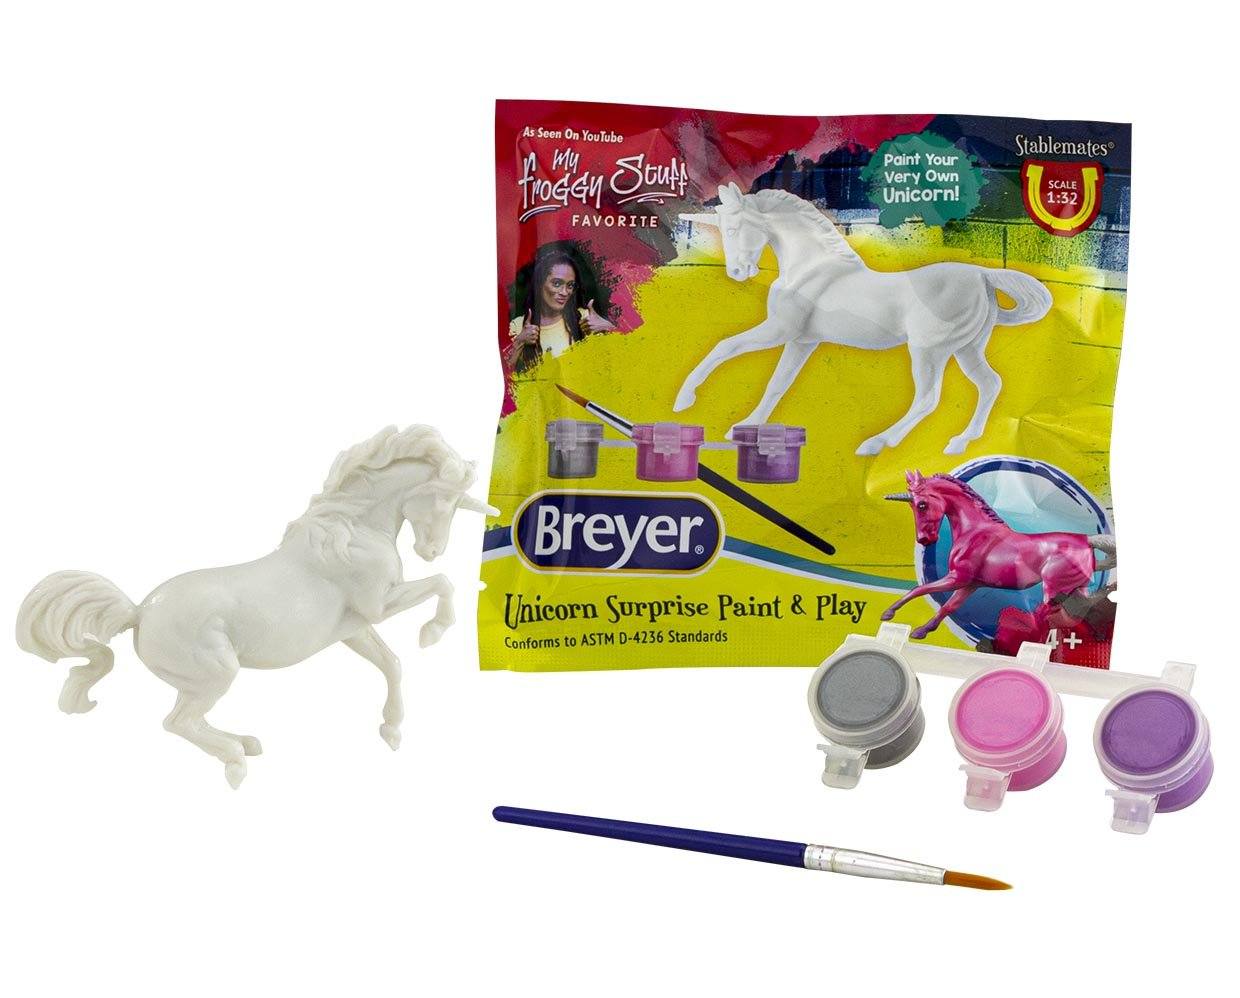 Breyer #4261 Stablemate Unicorn Surprise Paint & Play Blind Bag